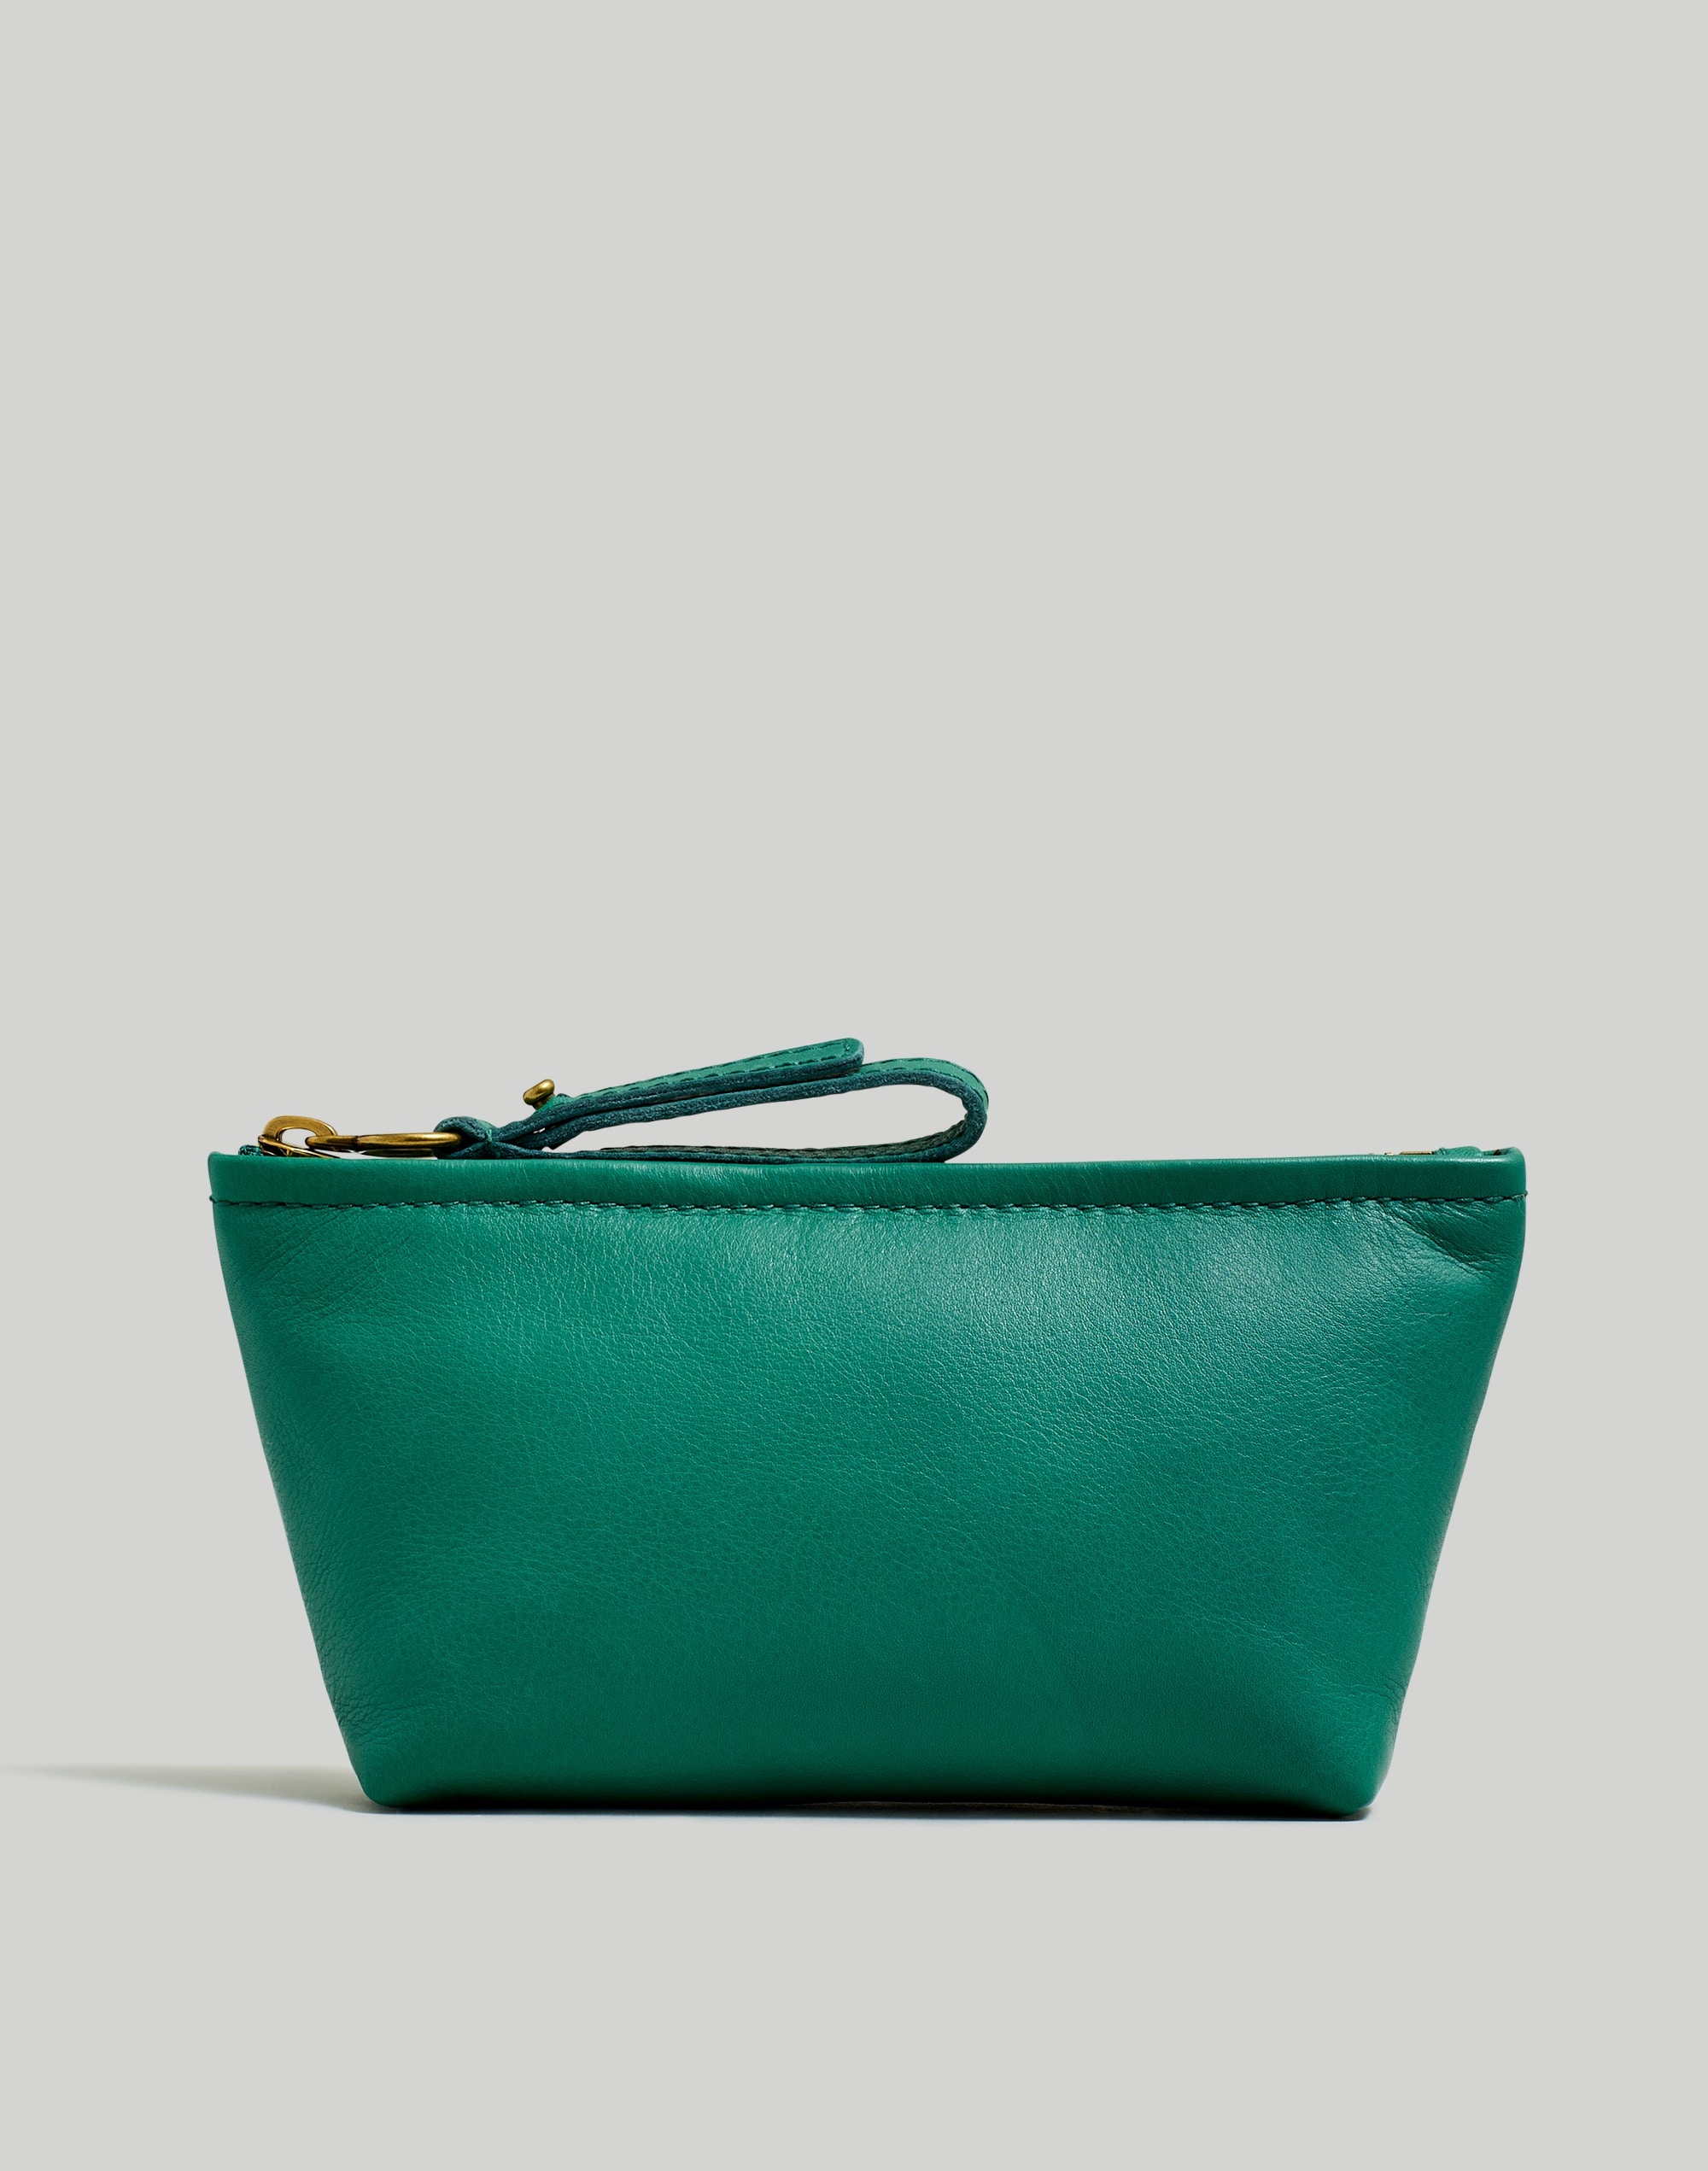 Mw The Piazza Zip Pouch In Jade Green